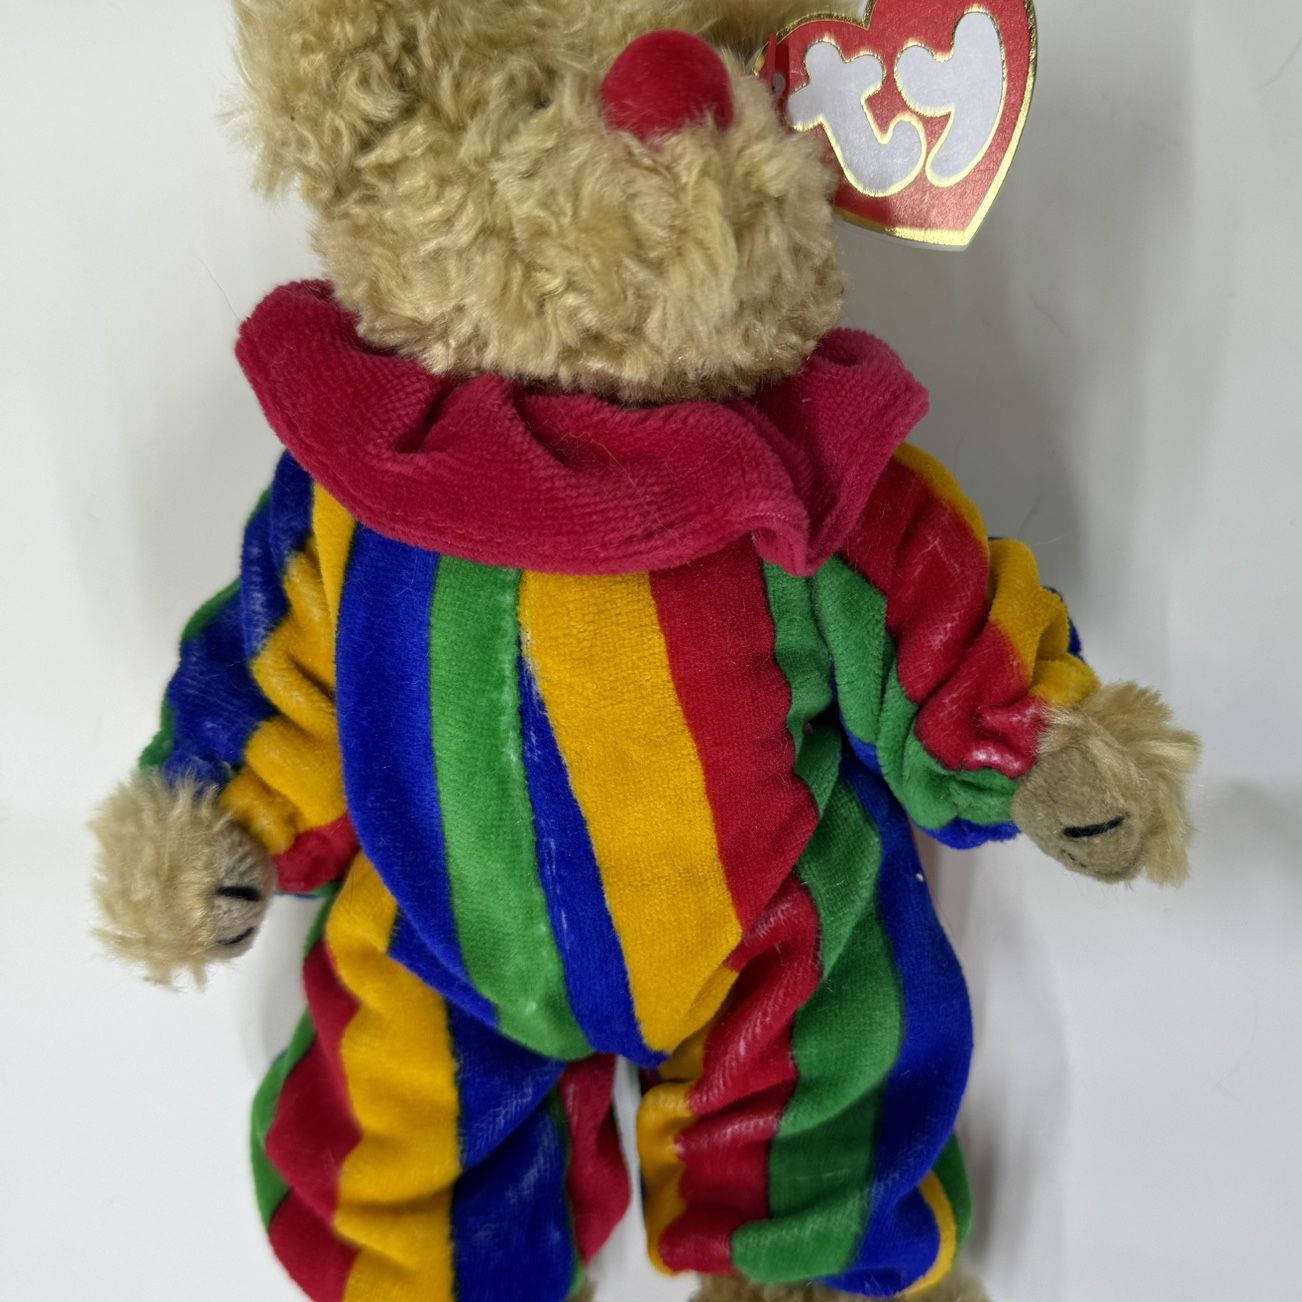 RARE!! Ty Original Beanie Baby “PICCADILLY” (1993) - NEW